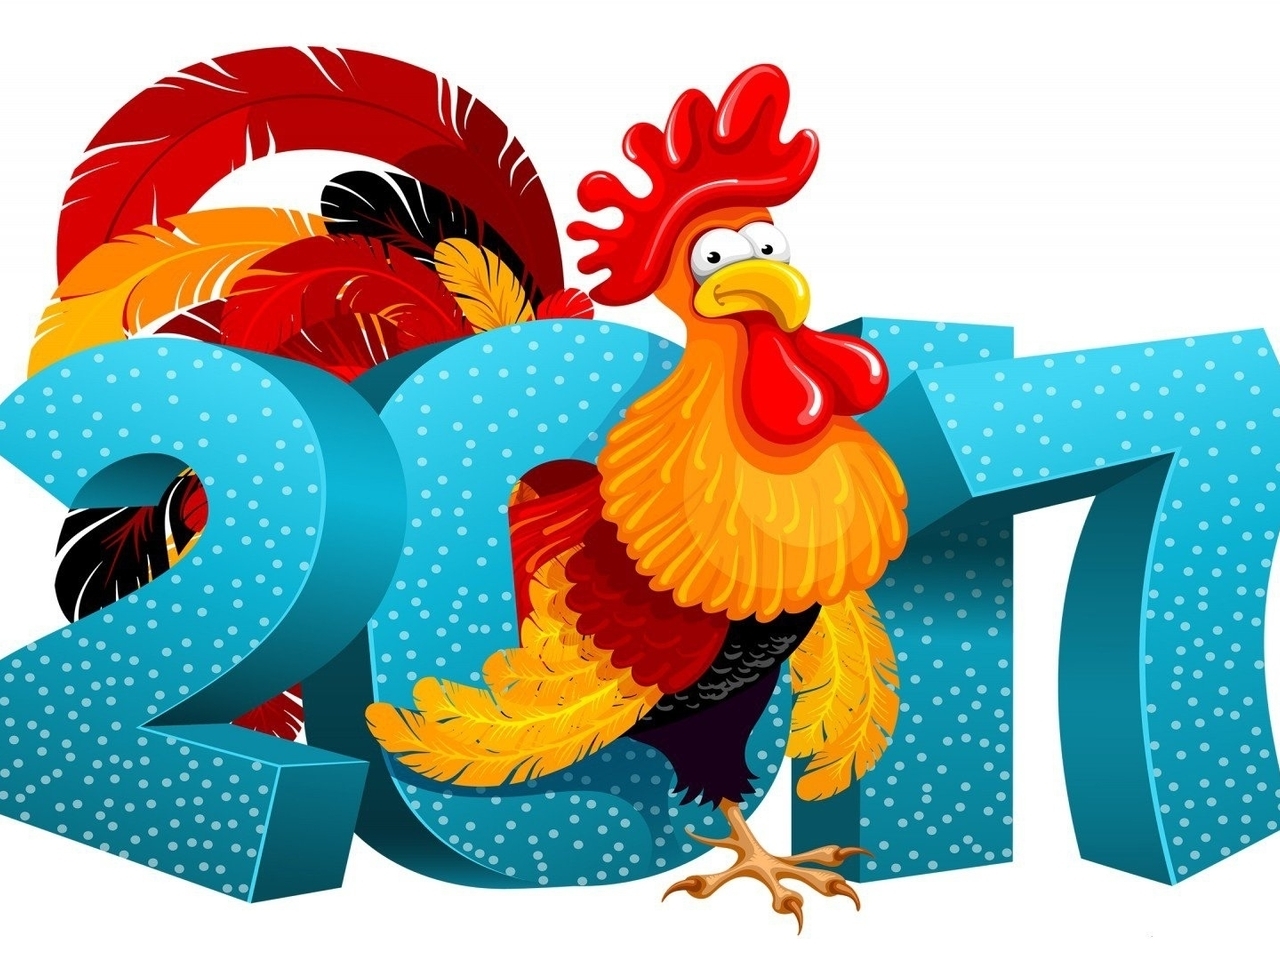 Image: New year, date, 2017, cock, digits, white background